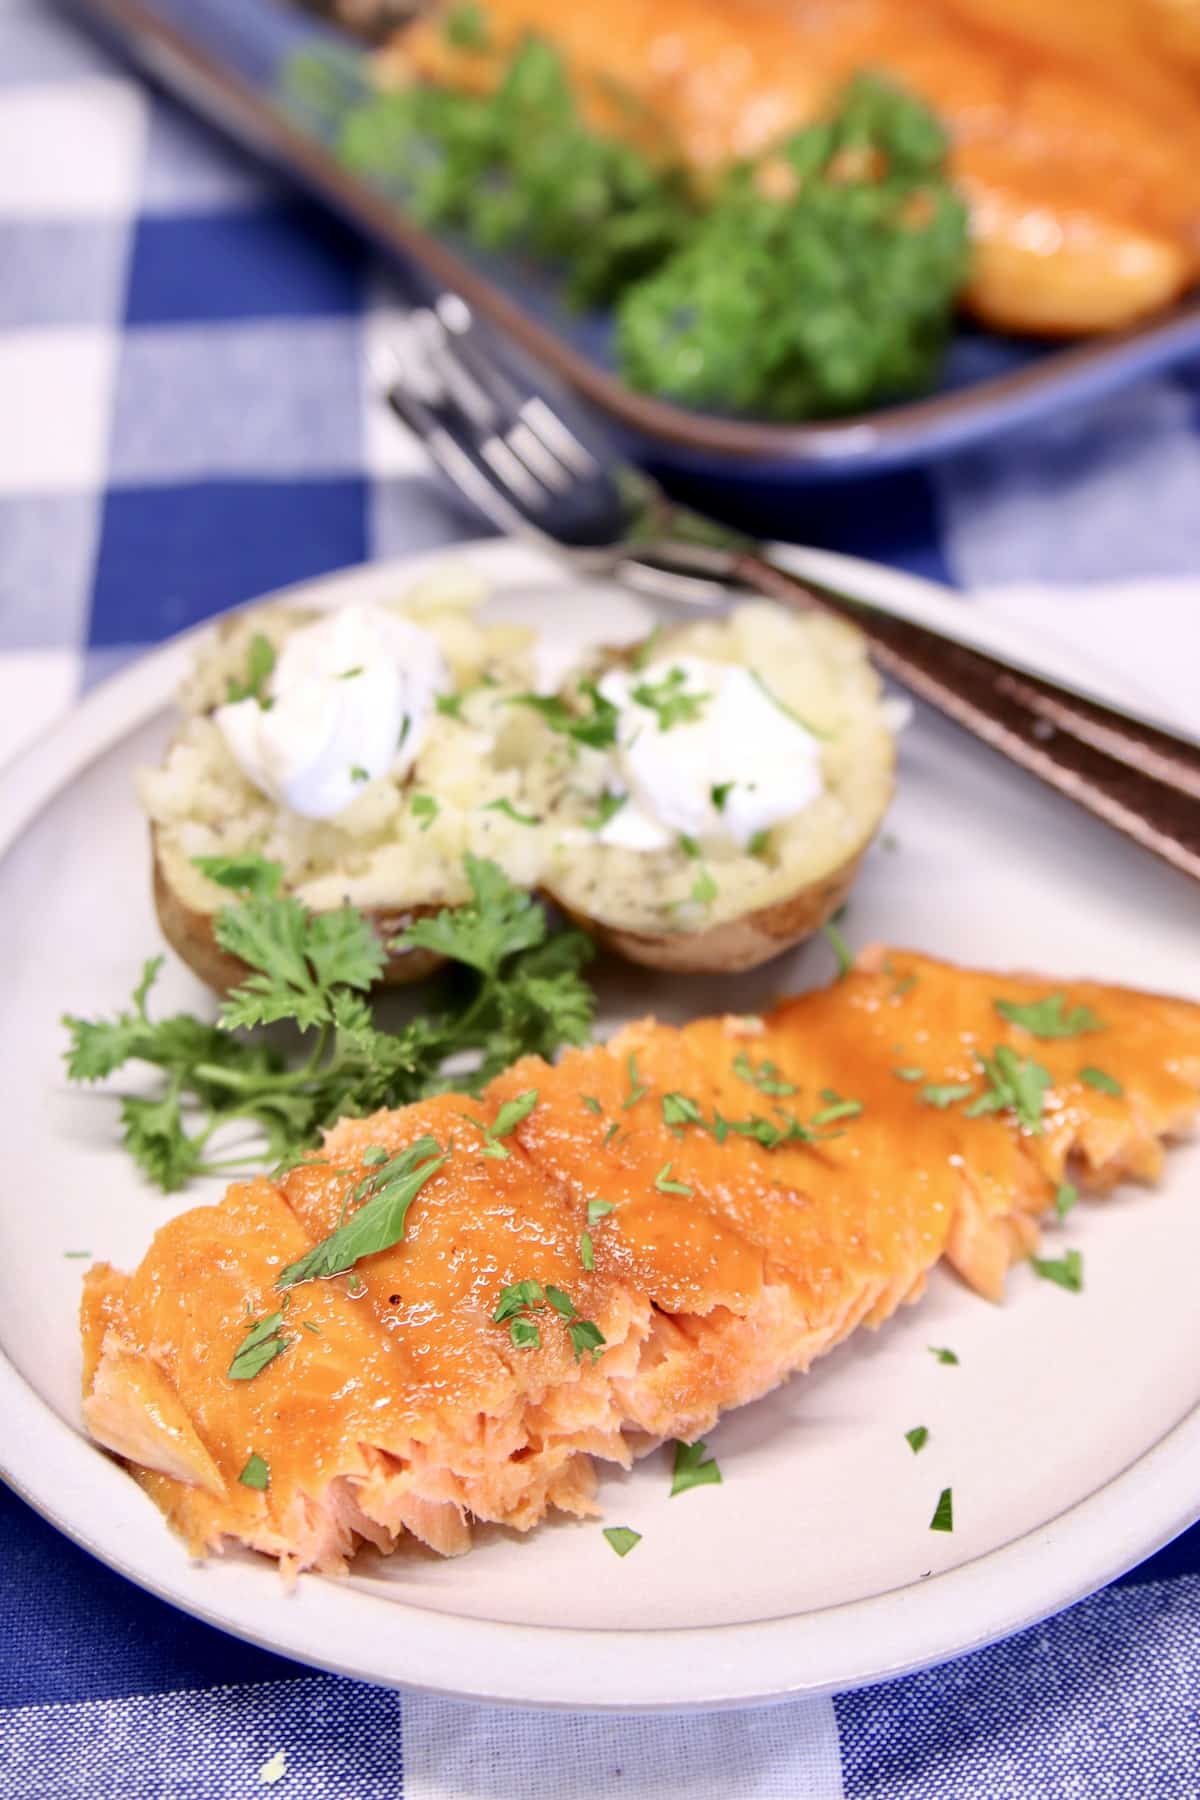 Plated salmon fillet with baked potato.